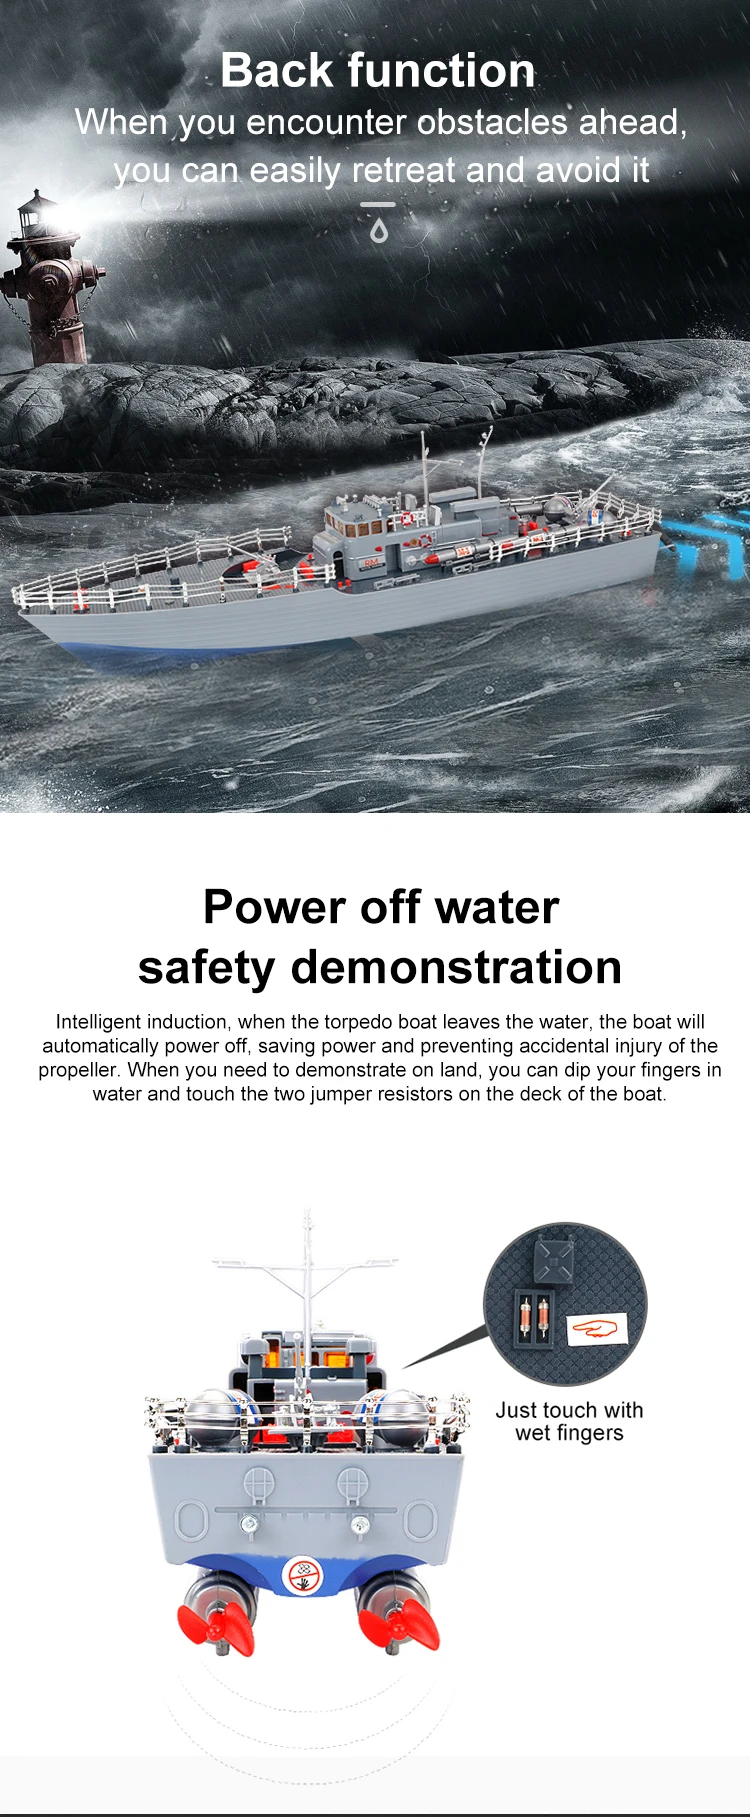 Unique design 4 channel 1:115 waterproof rechargeable 2.4G remote control rc boat with light